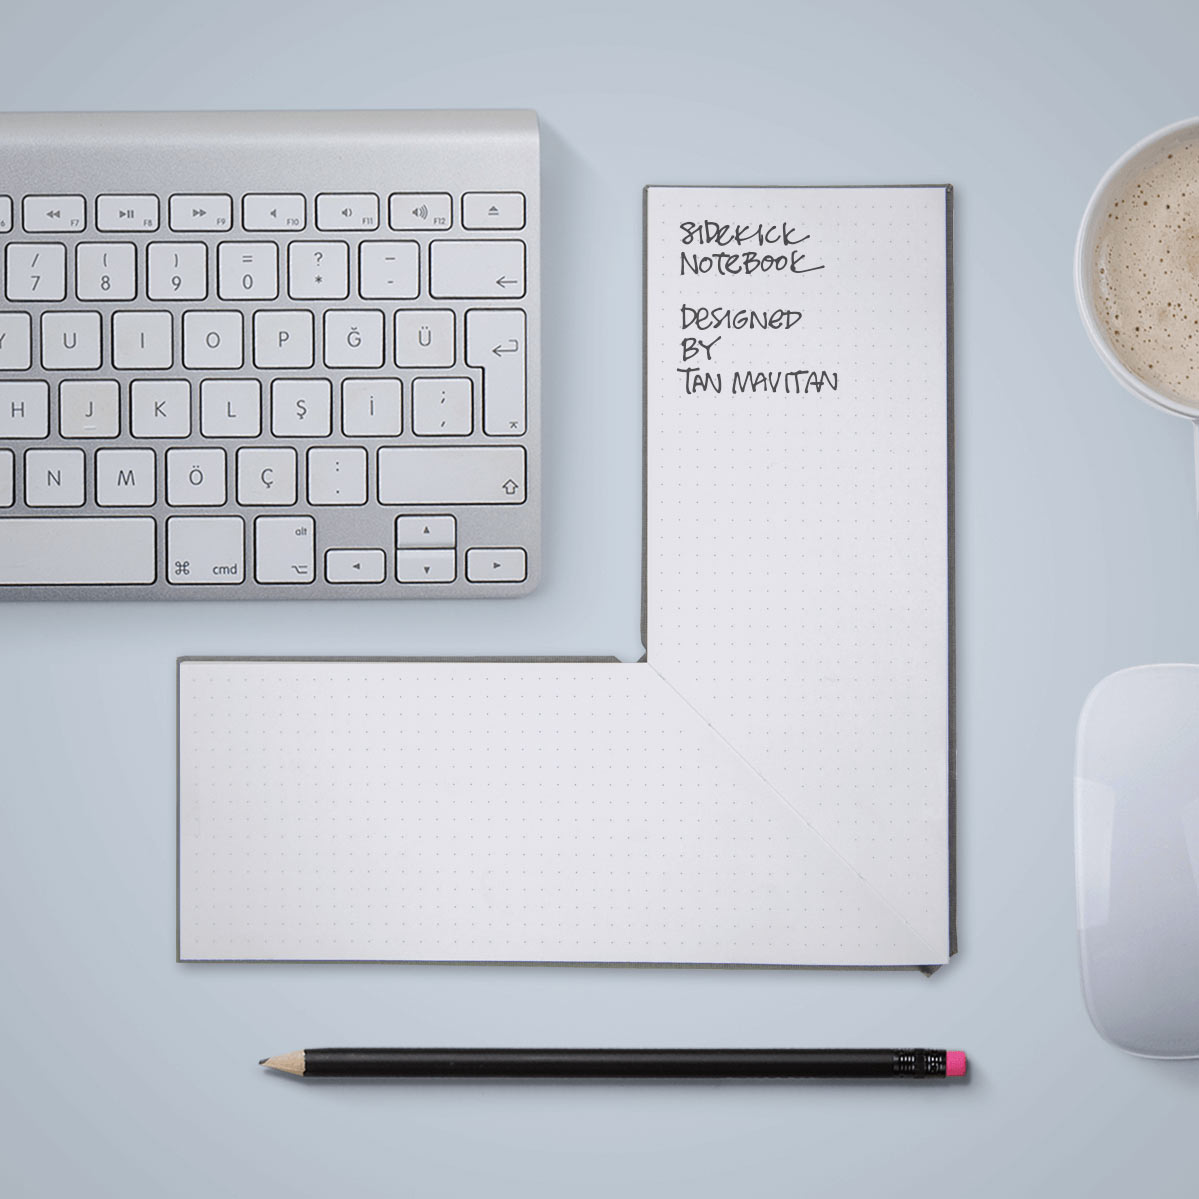 The Sidekick Notebook Conveniently Wraps Around a Keyboard, iPad, or Book